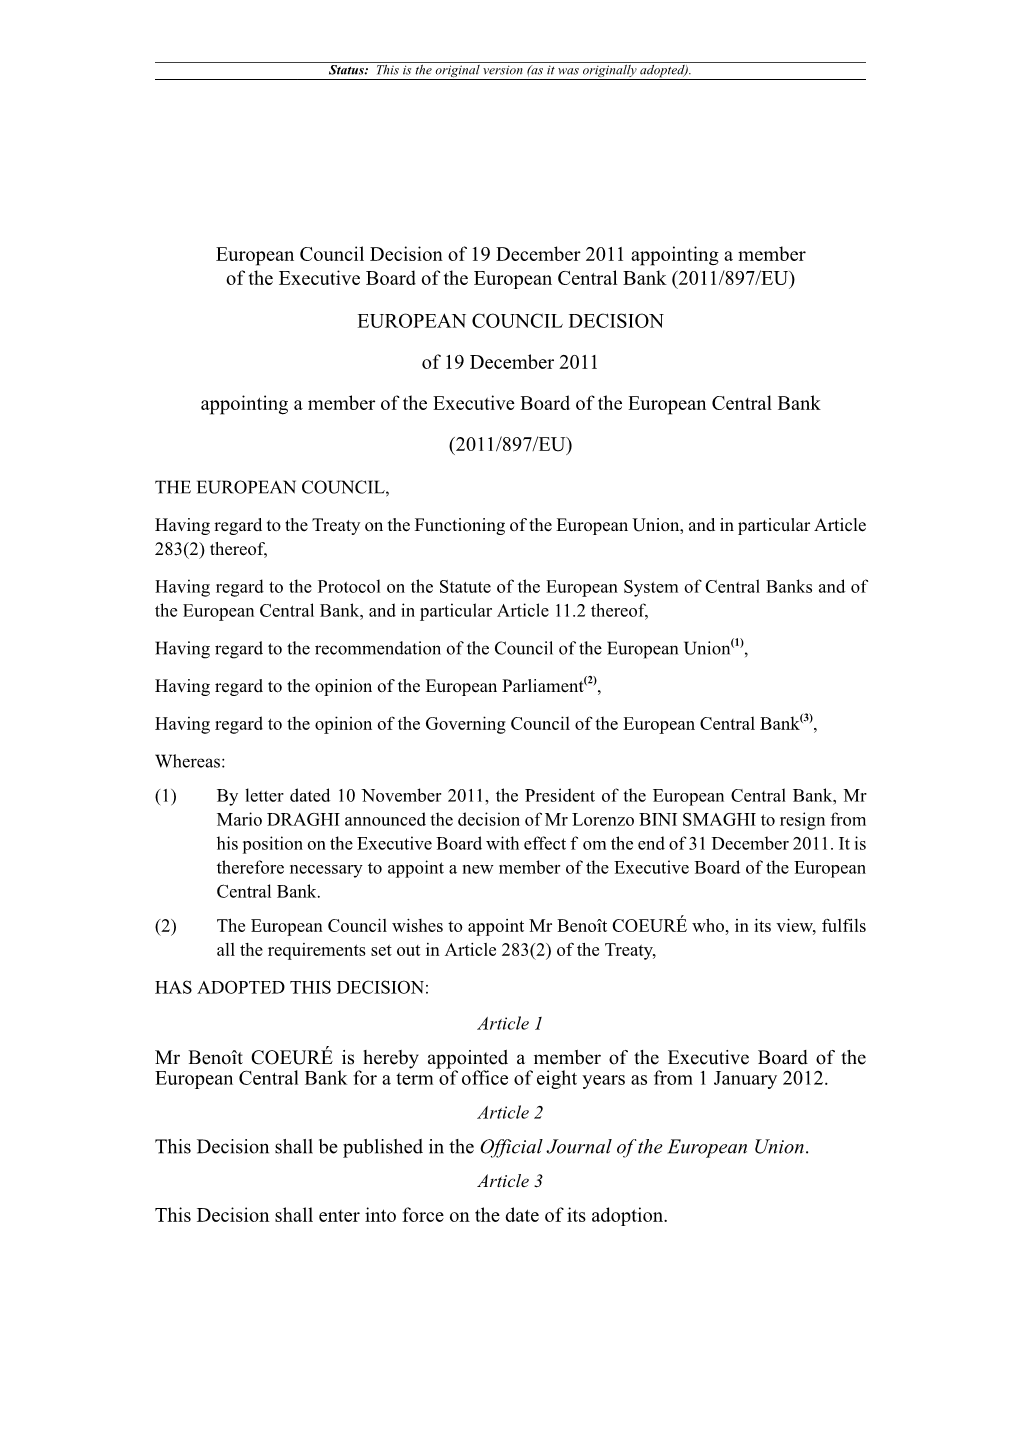 European Council Decision of 19 December 2011 Appointing a Member of the Executive Board of the European Central Bank (2011/897/EU)